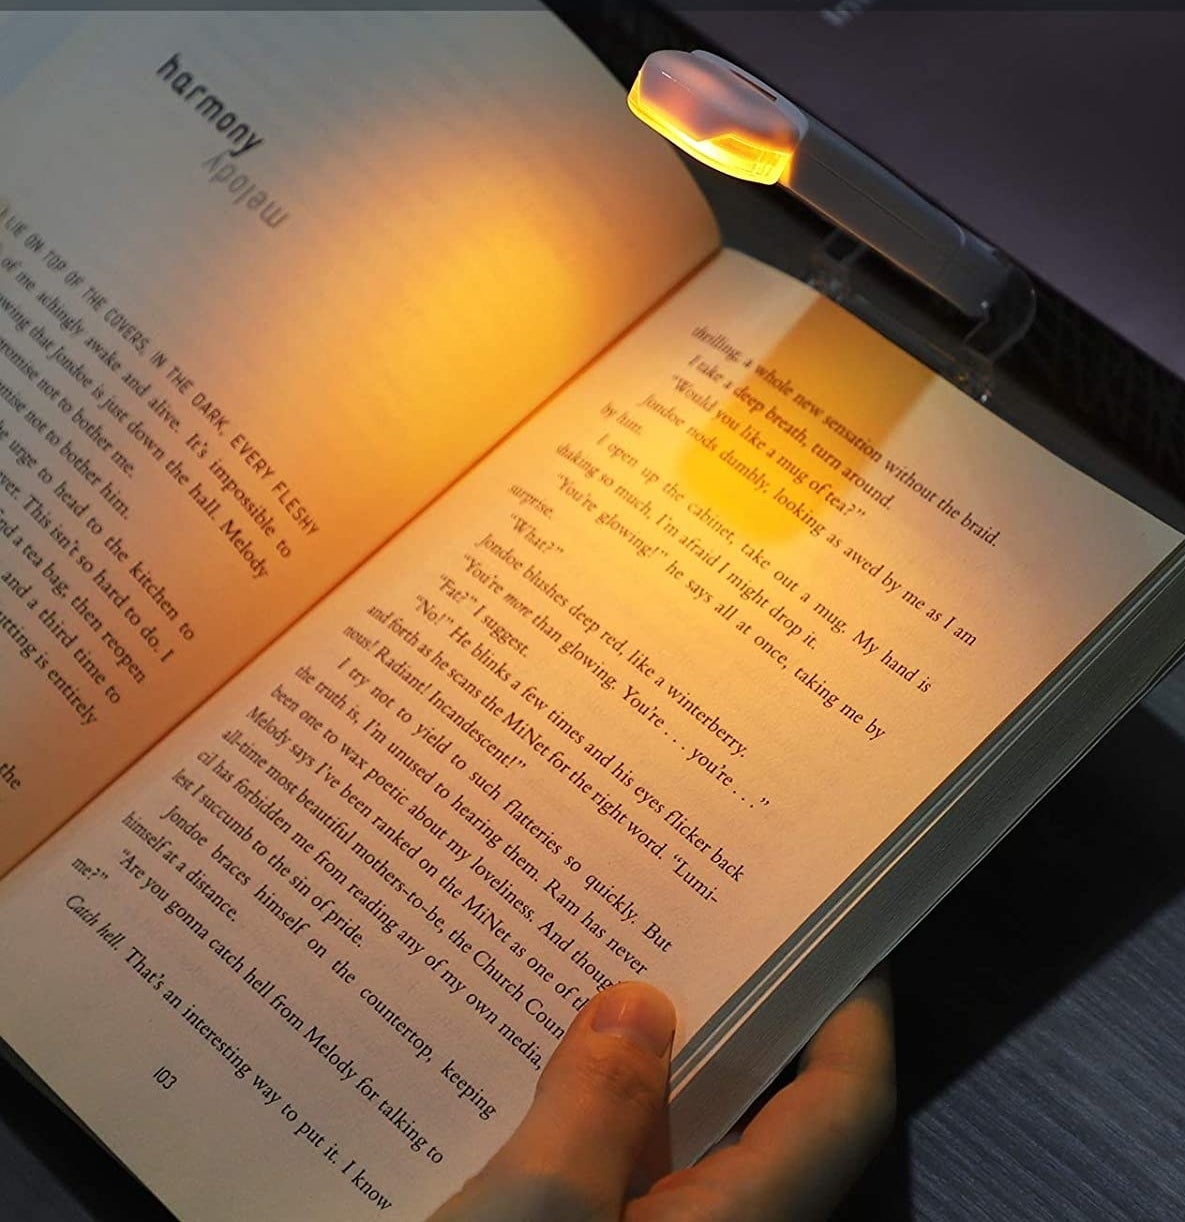 a small light clipped onto a book illuminating the pages